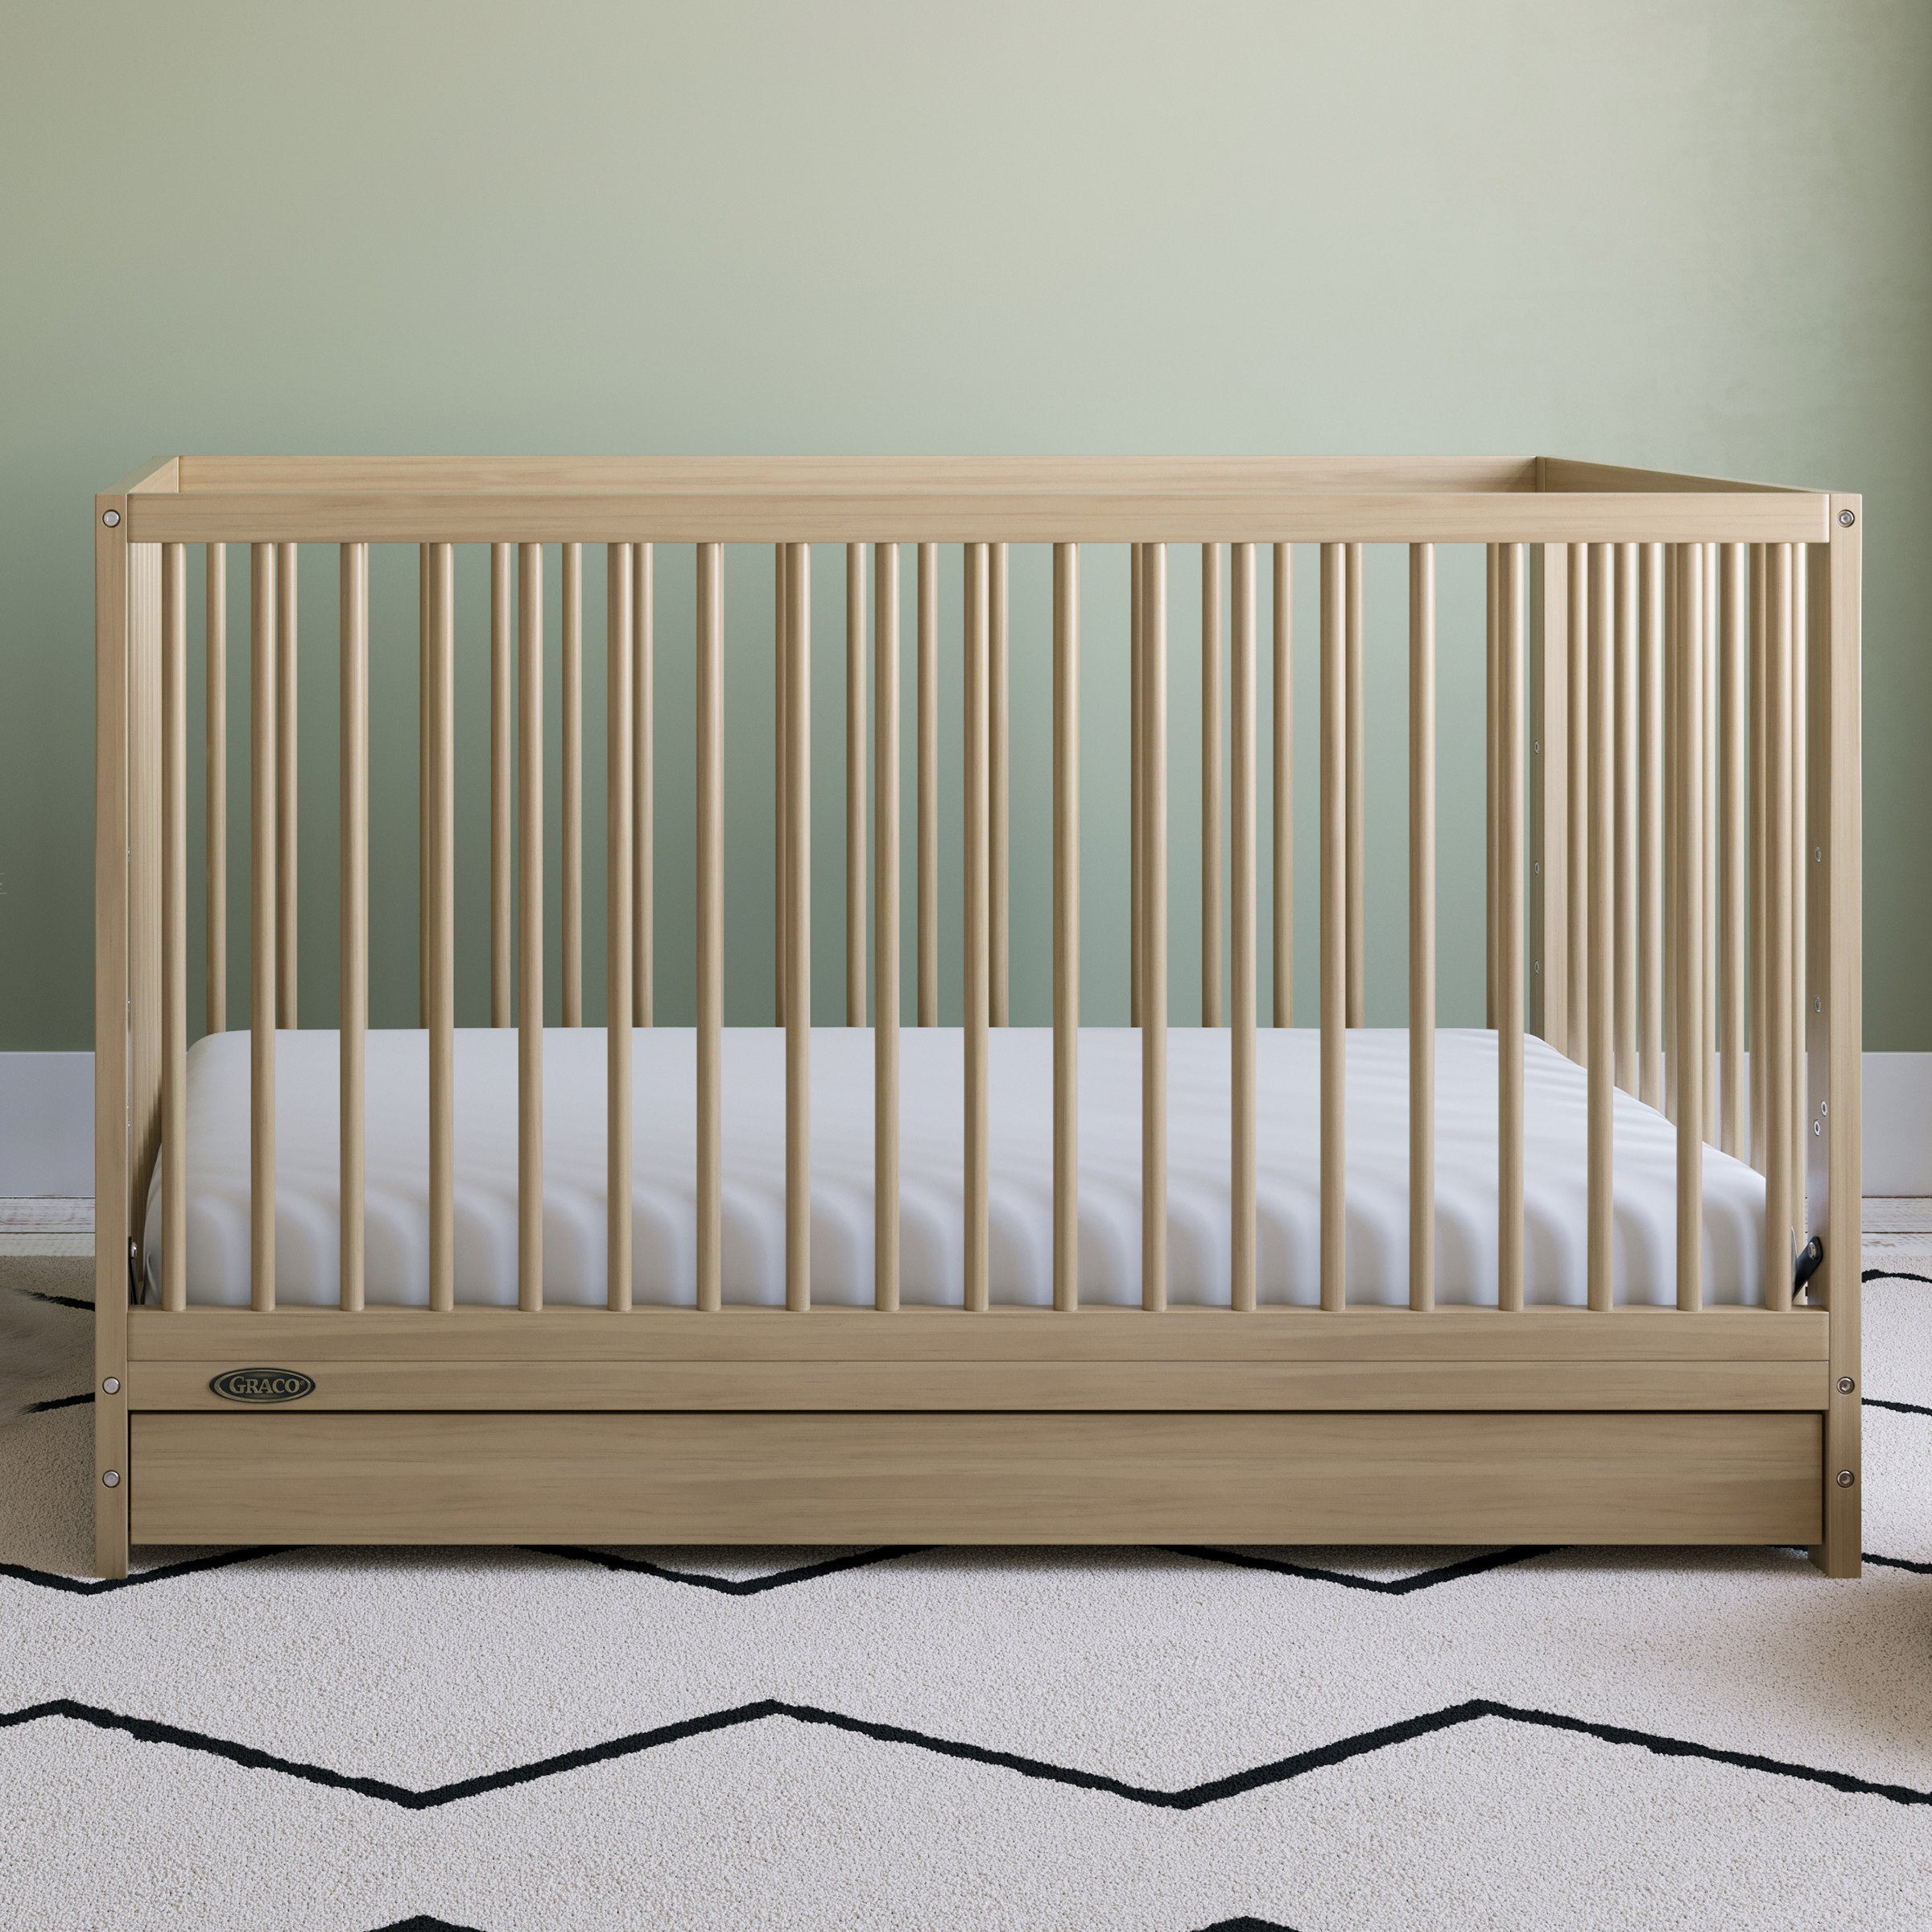 Graco Teddi 5-in-1 Convertible Baby Crib with Drawer, Driftwood - image 3 of 17